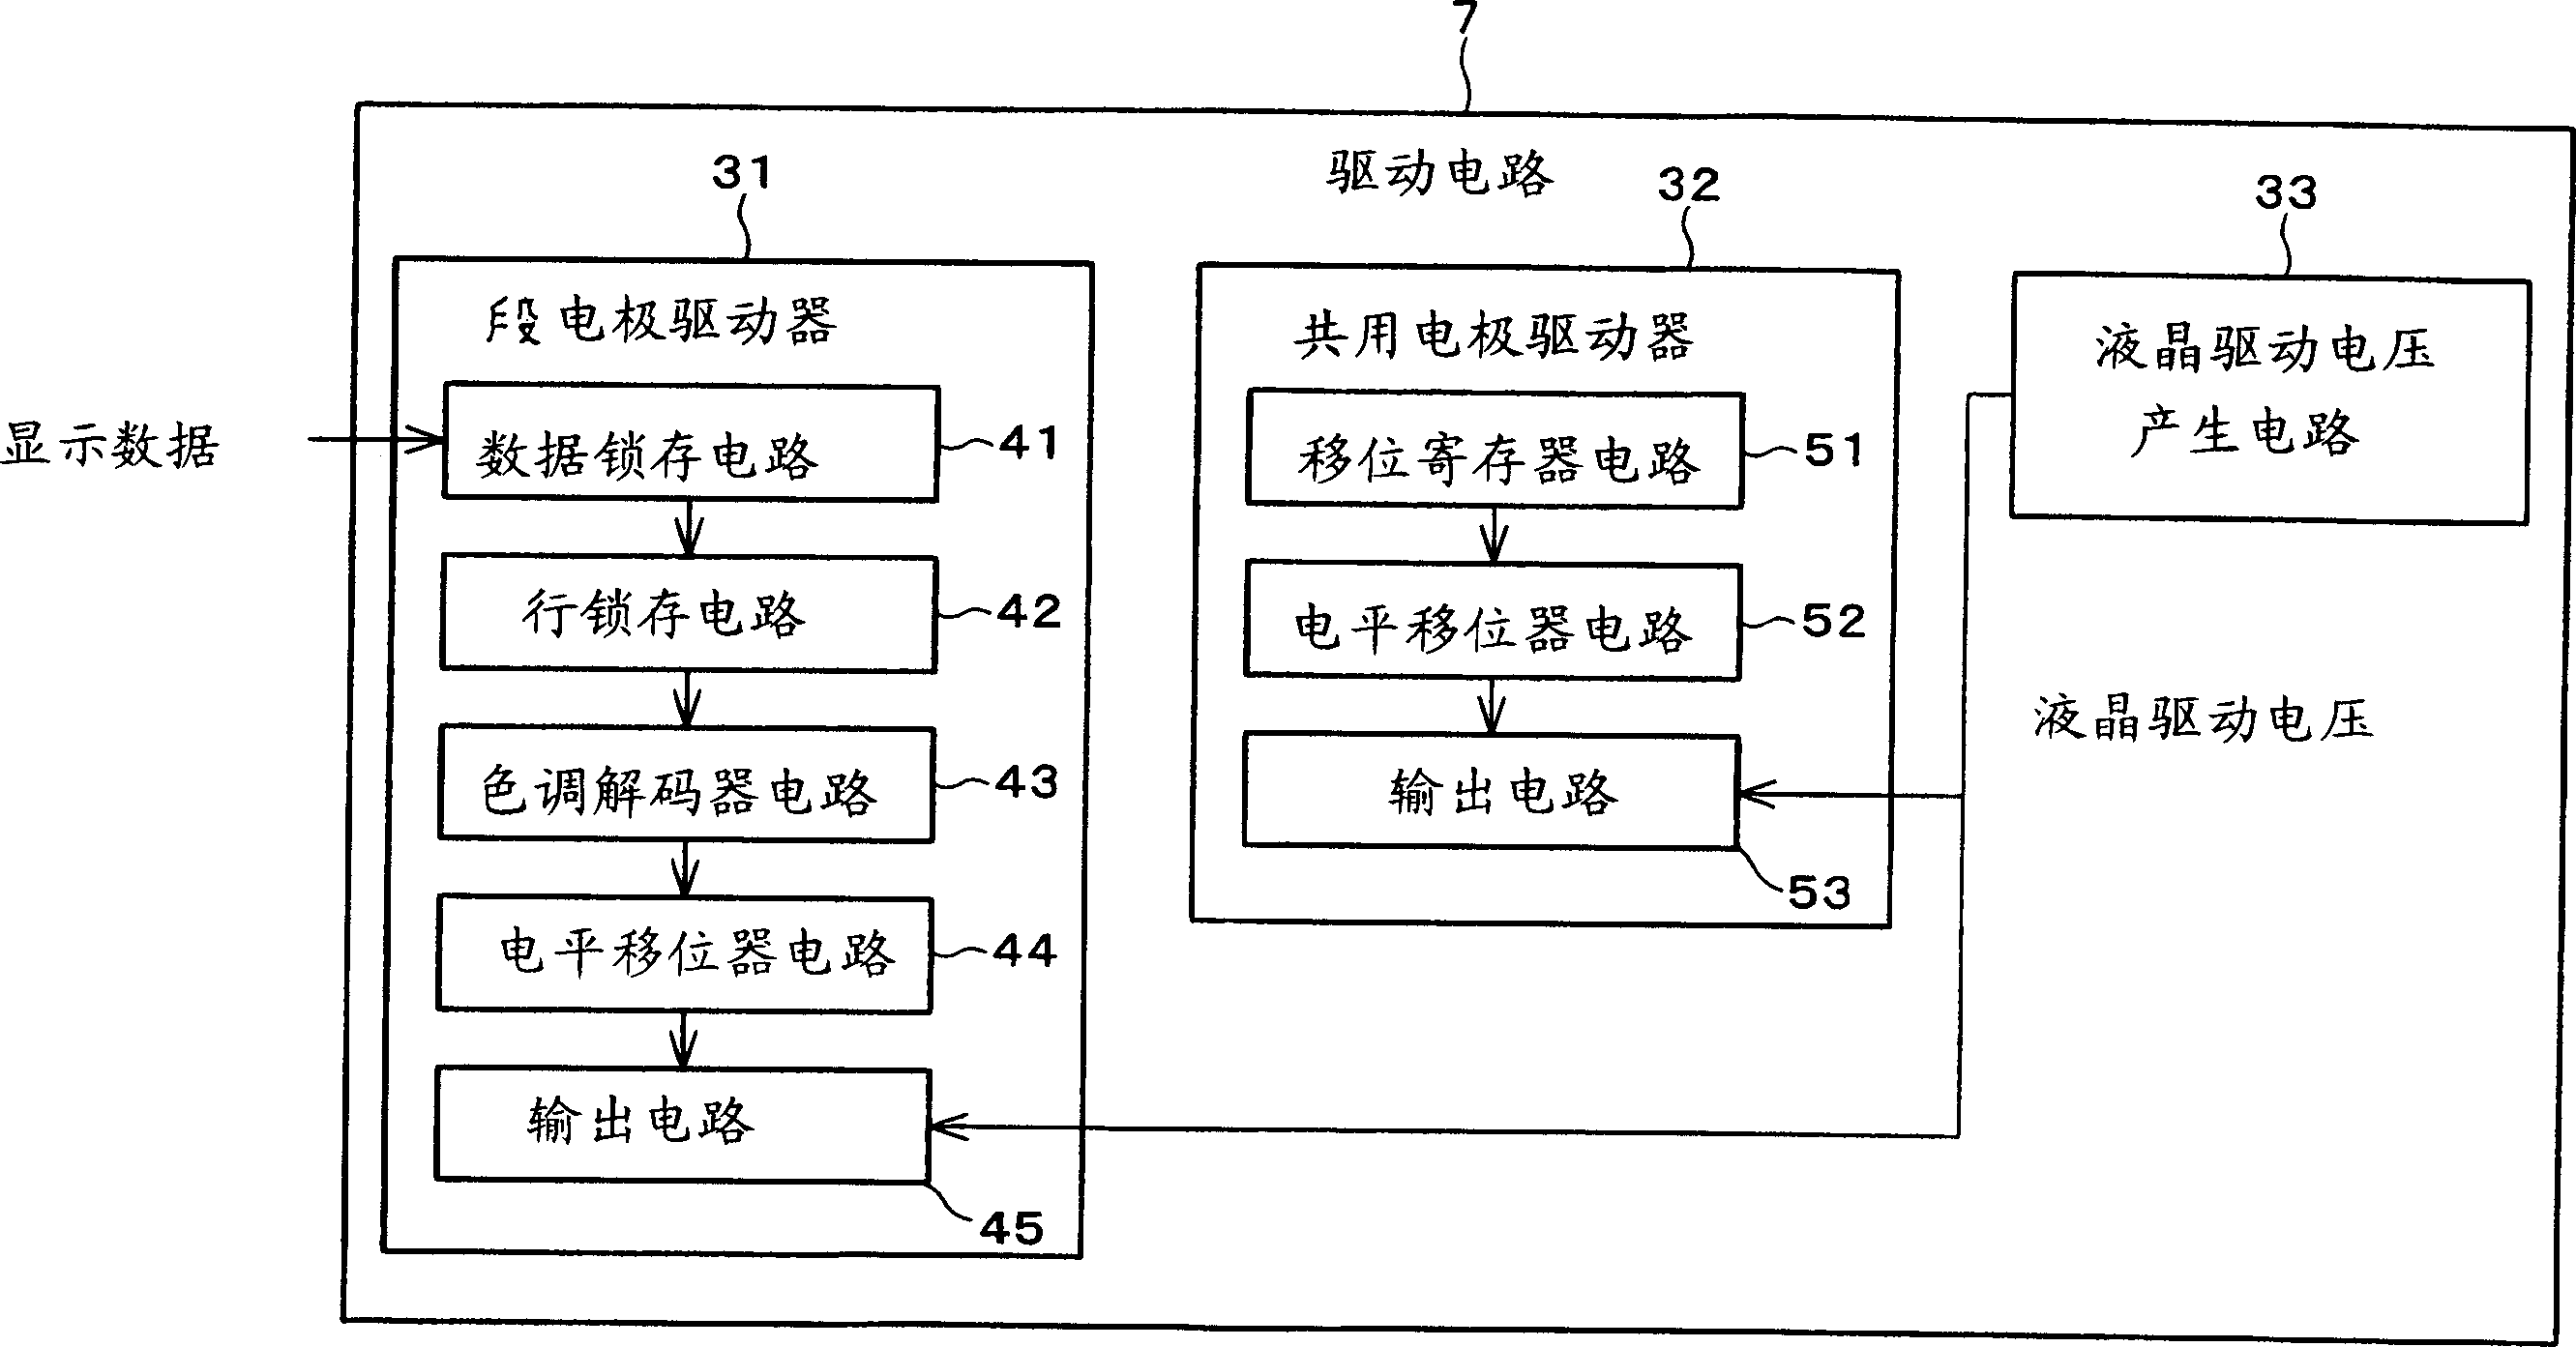 Driving device and method for display device